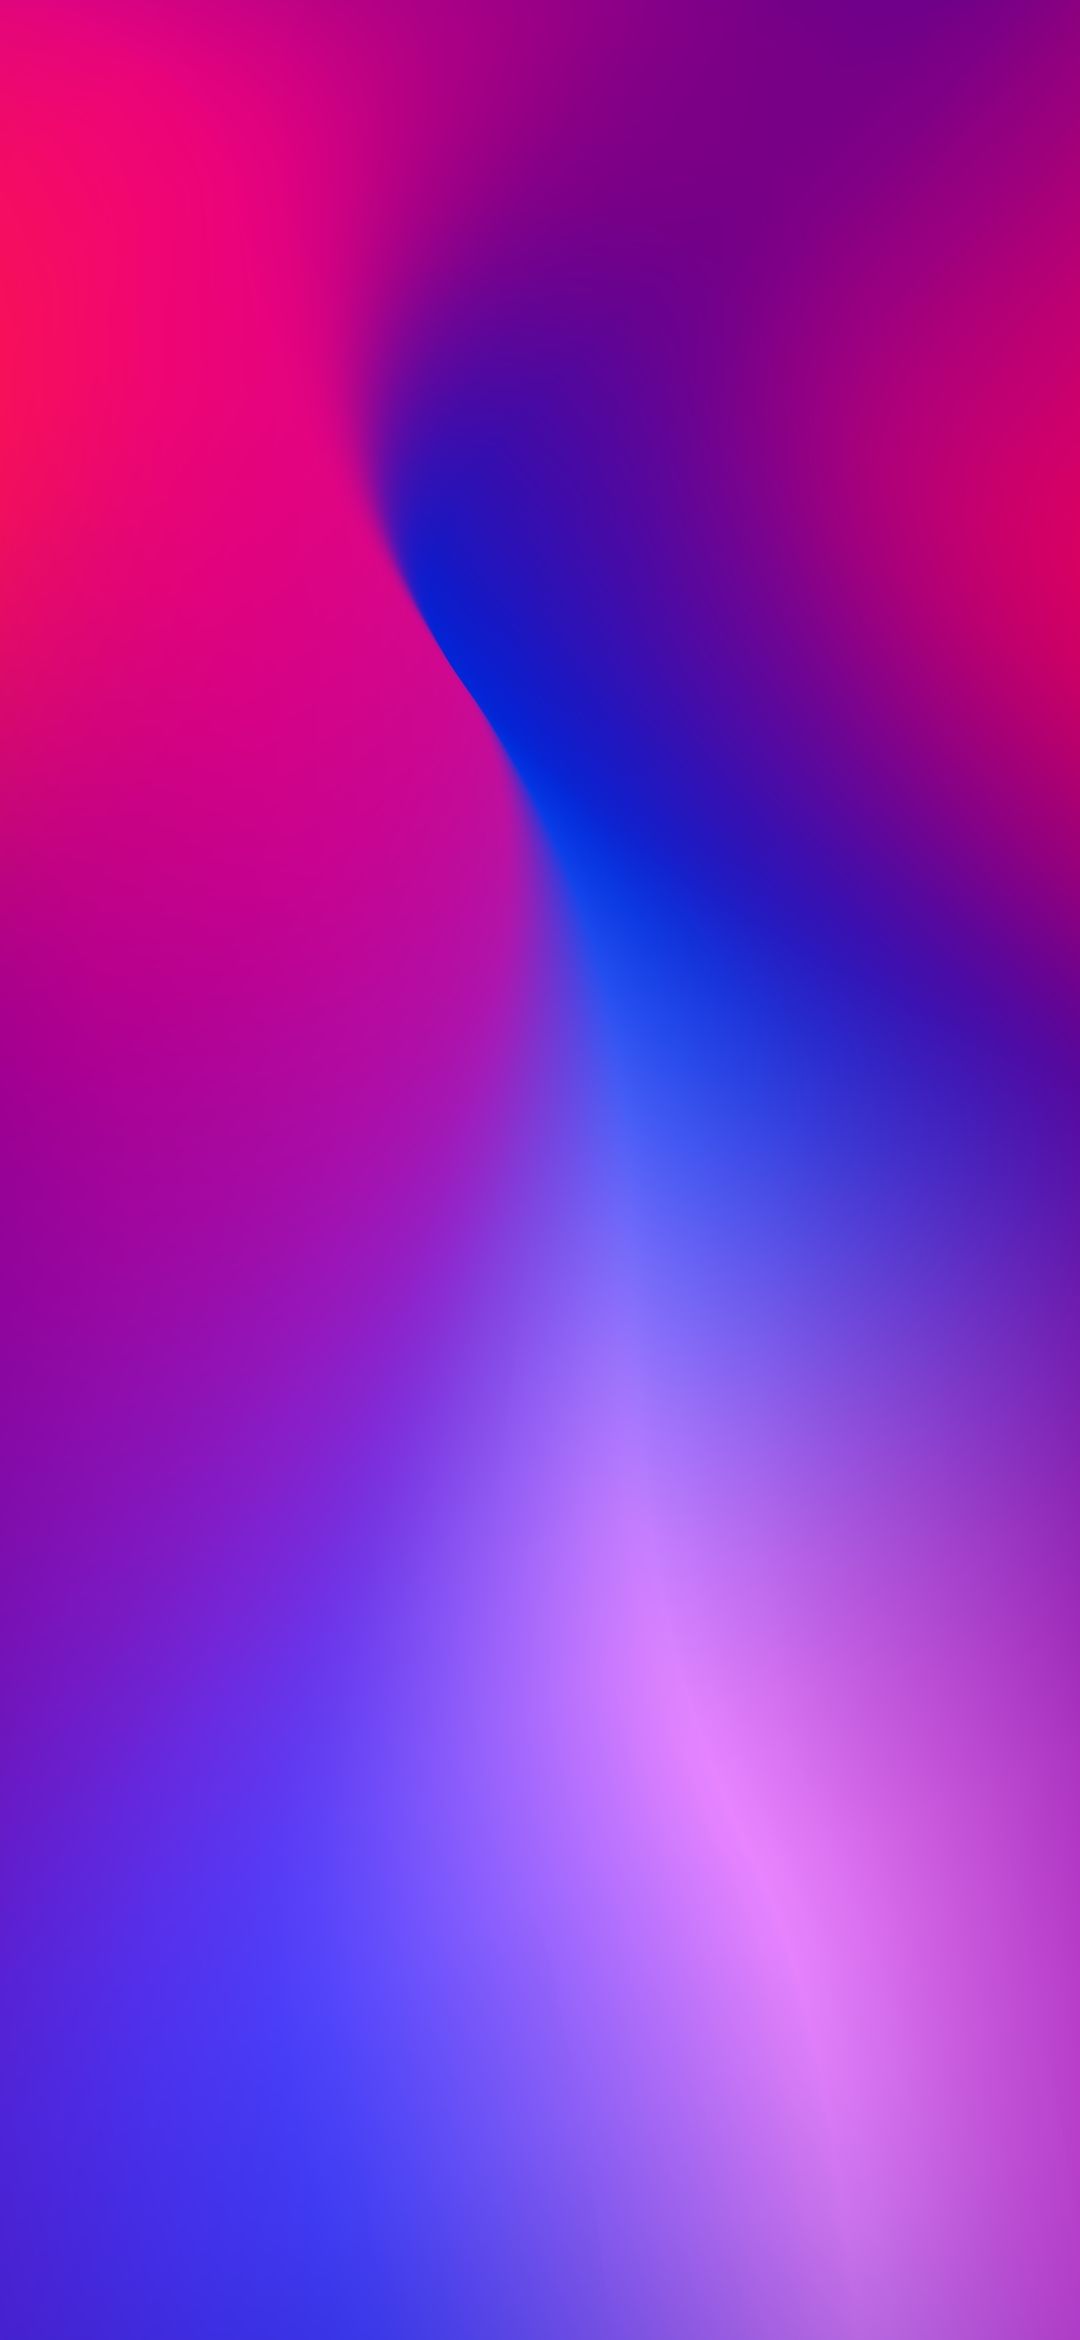 Oppo A31 Wallpapers - Wallpaper Cave